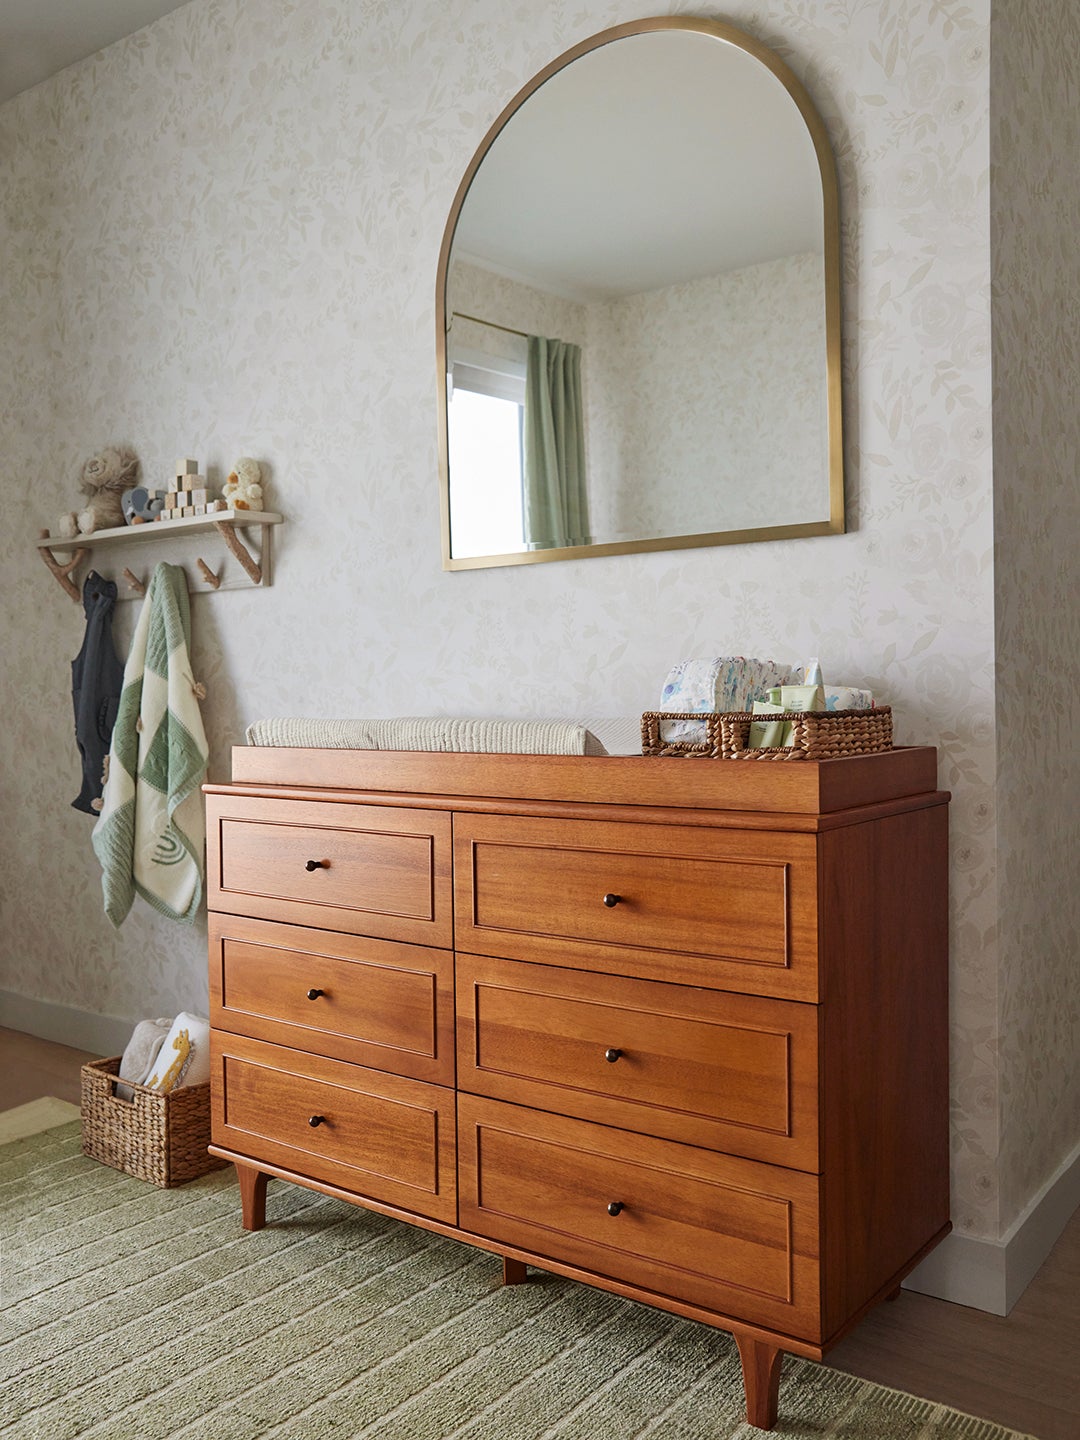 Dresser in nursery as a changing table